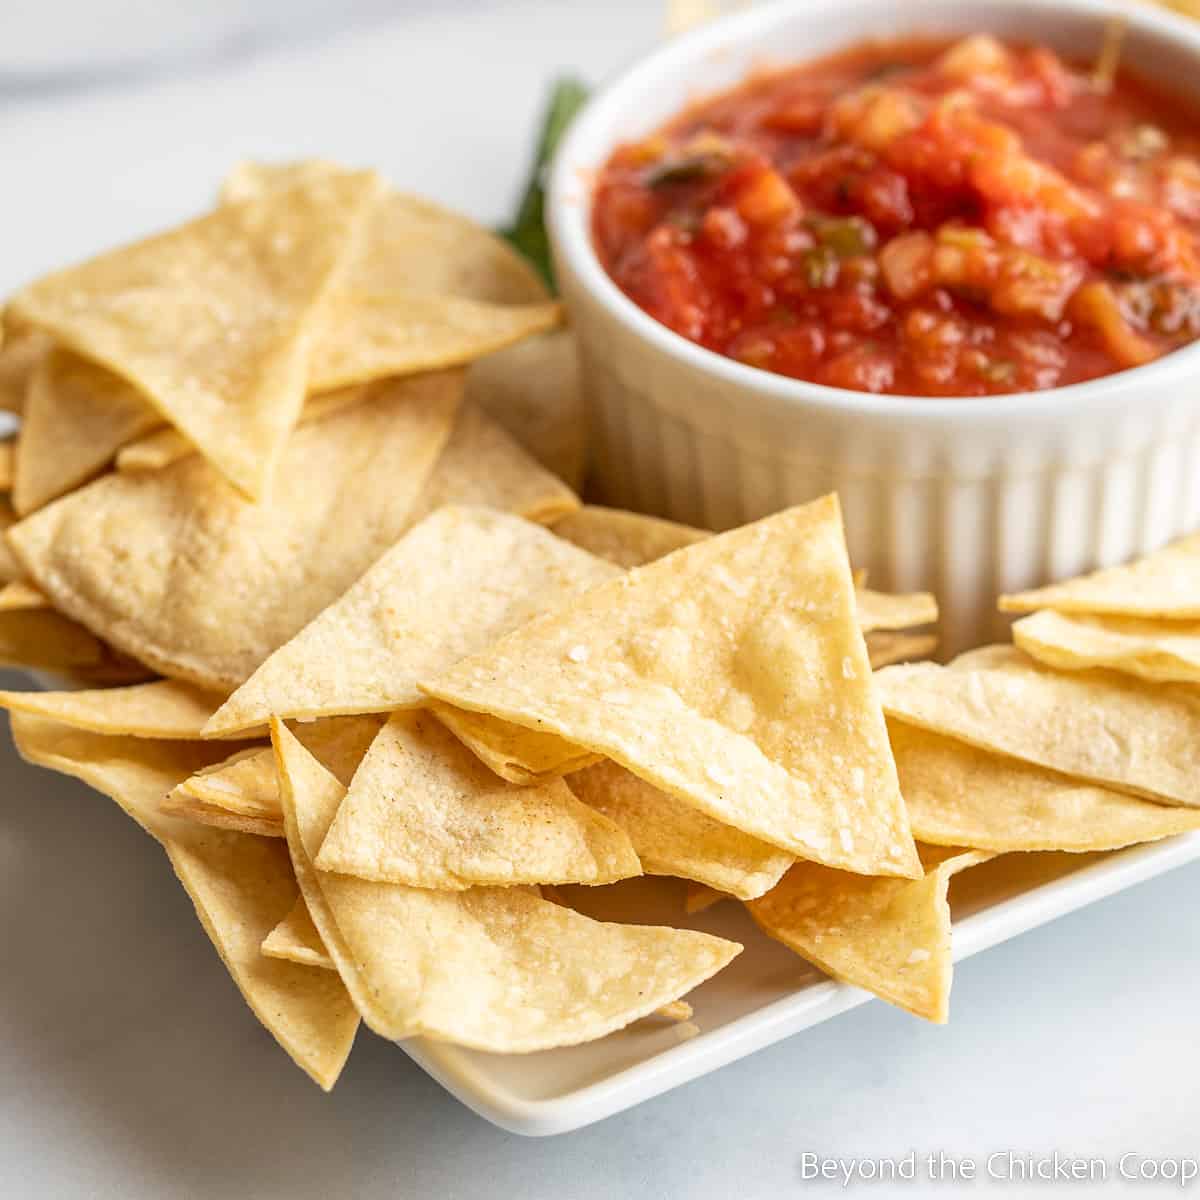 Tortilla chips and a bowl of salsa on a platter.